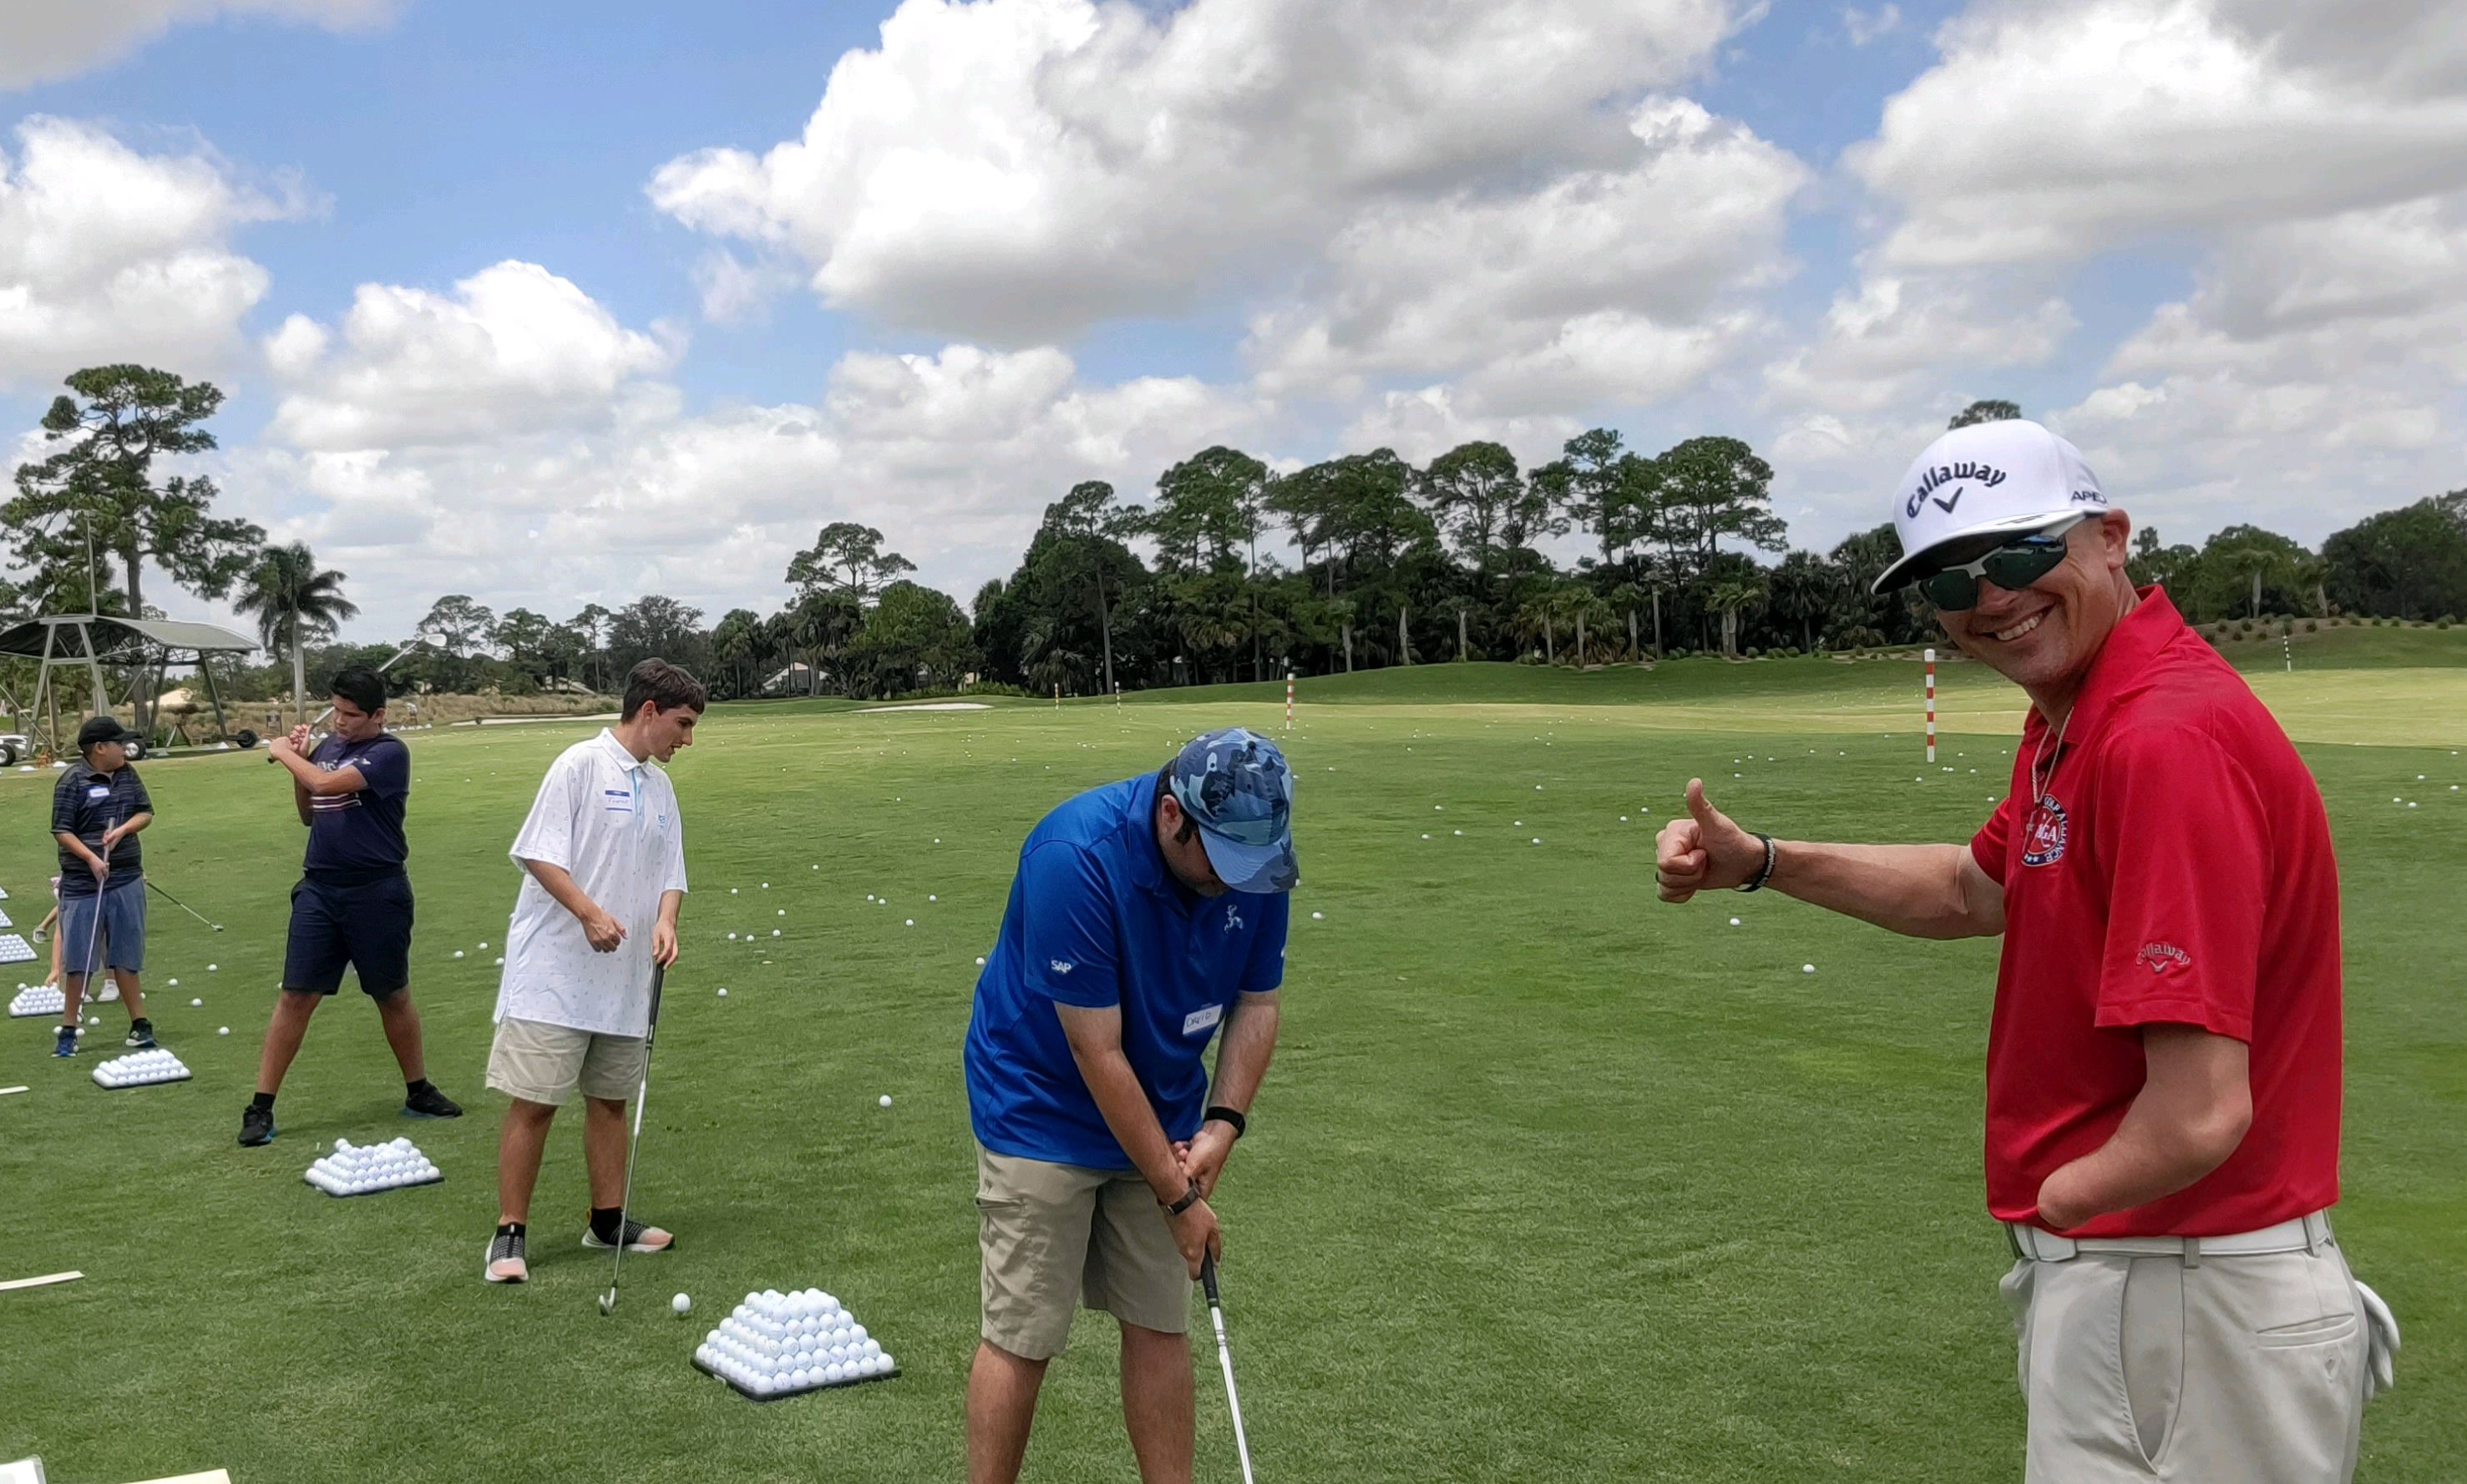 a group of golfers with disabilities and their coach on the course hitting balls